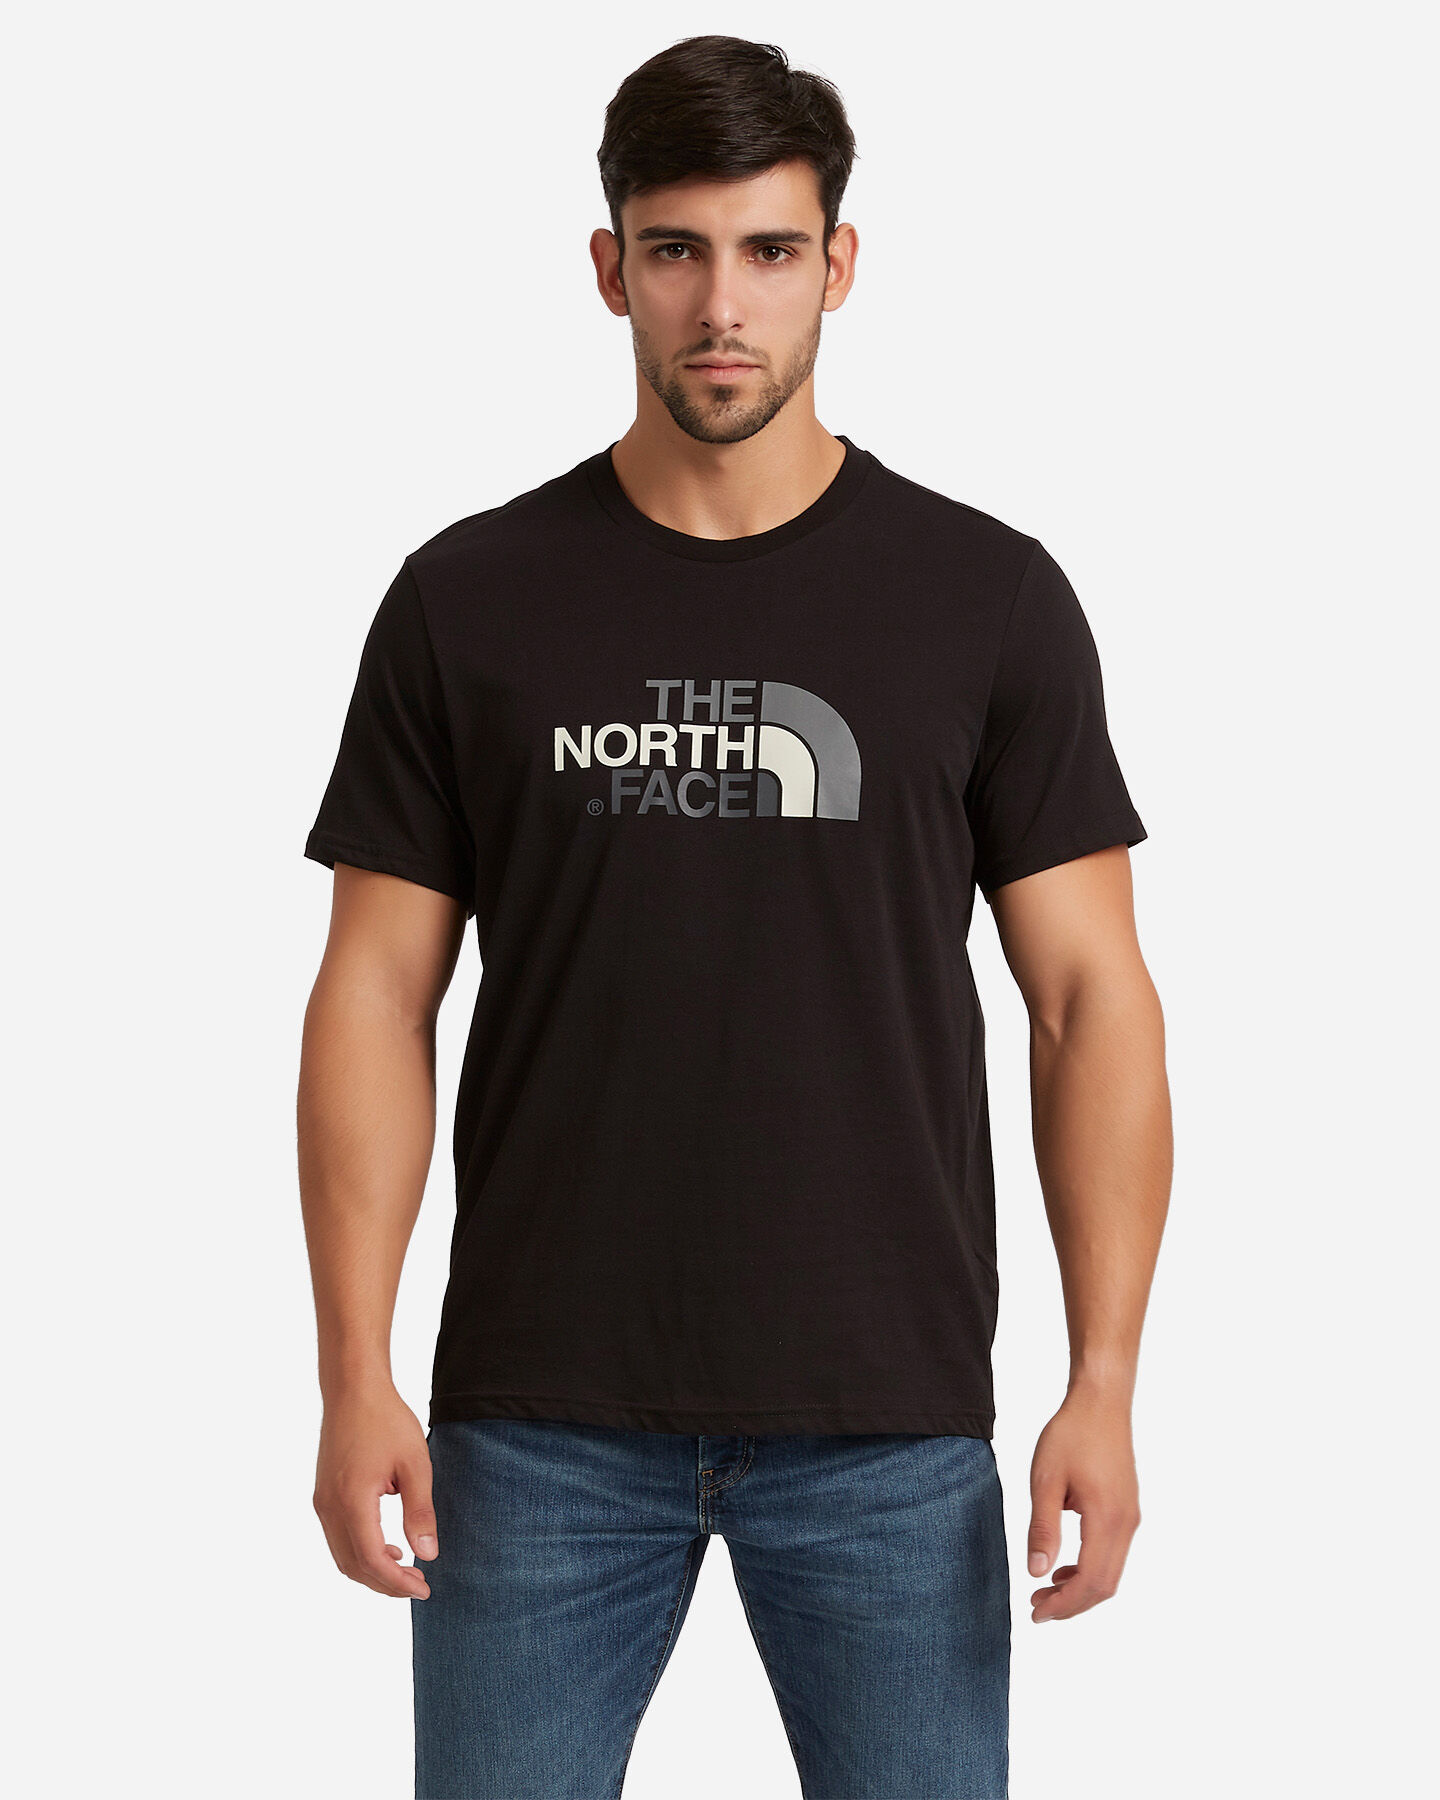  T-Shirt THE NORTH FACE EASY M S4054035|JK3|XS scatto 0